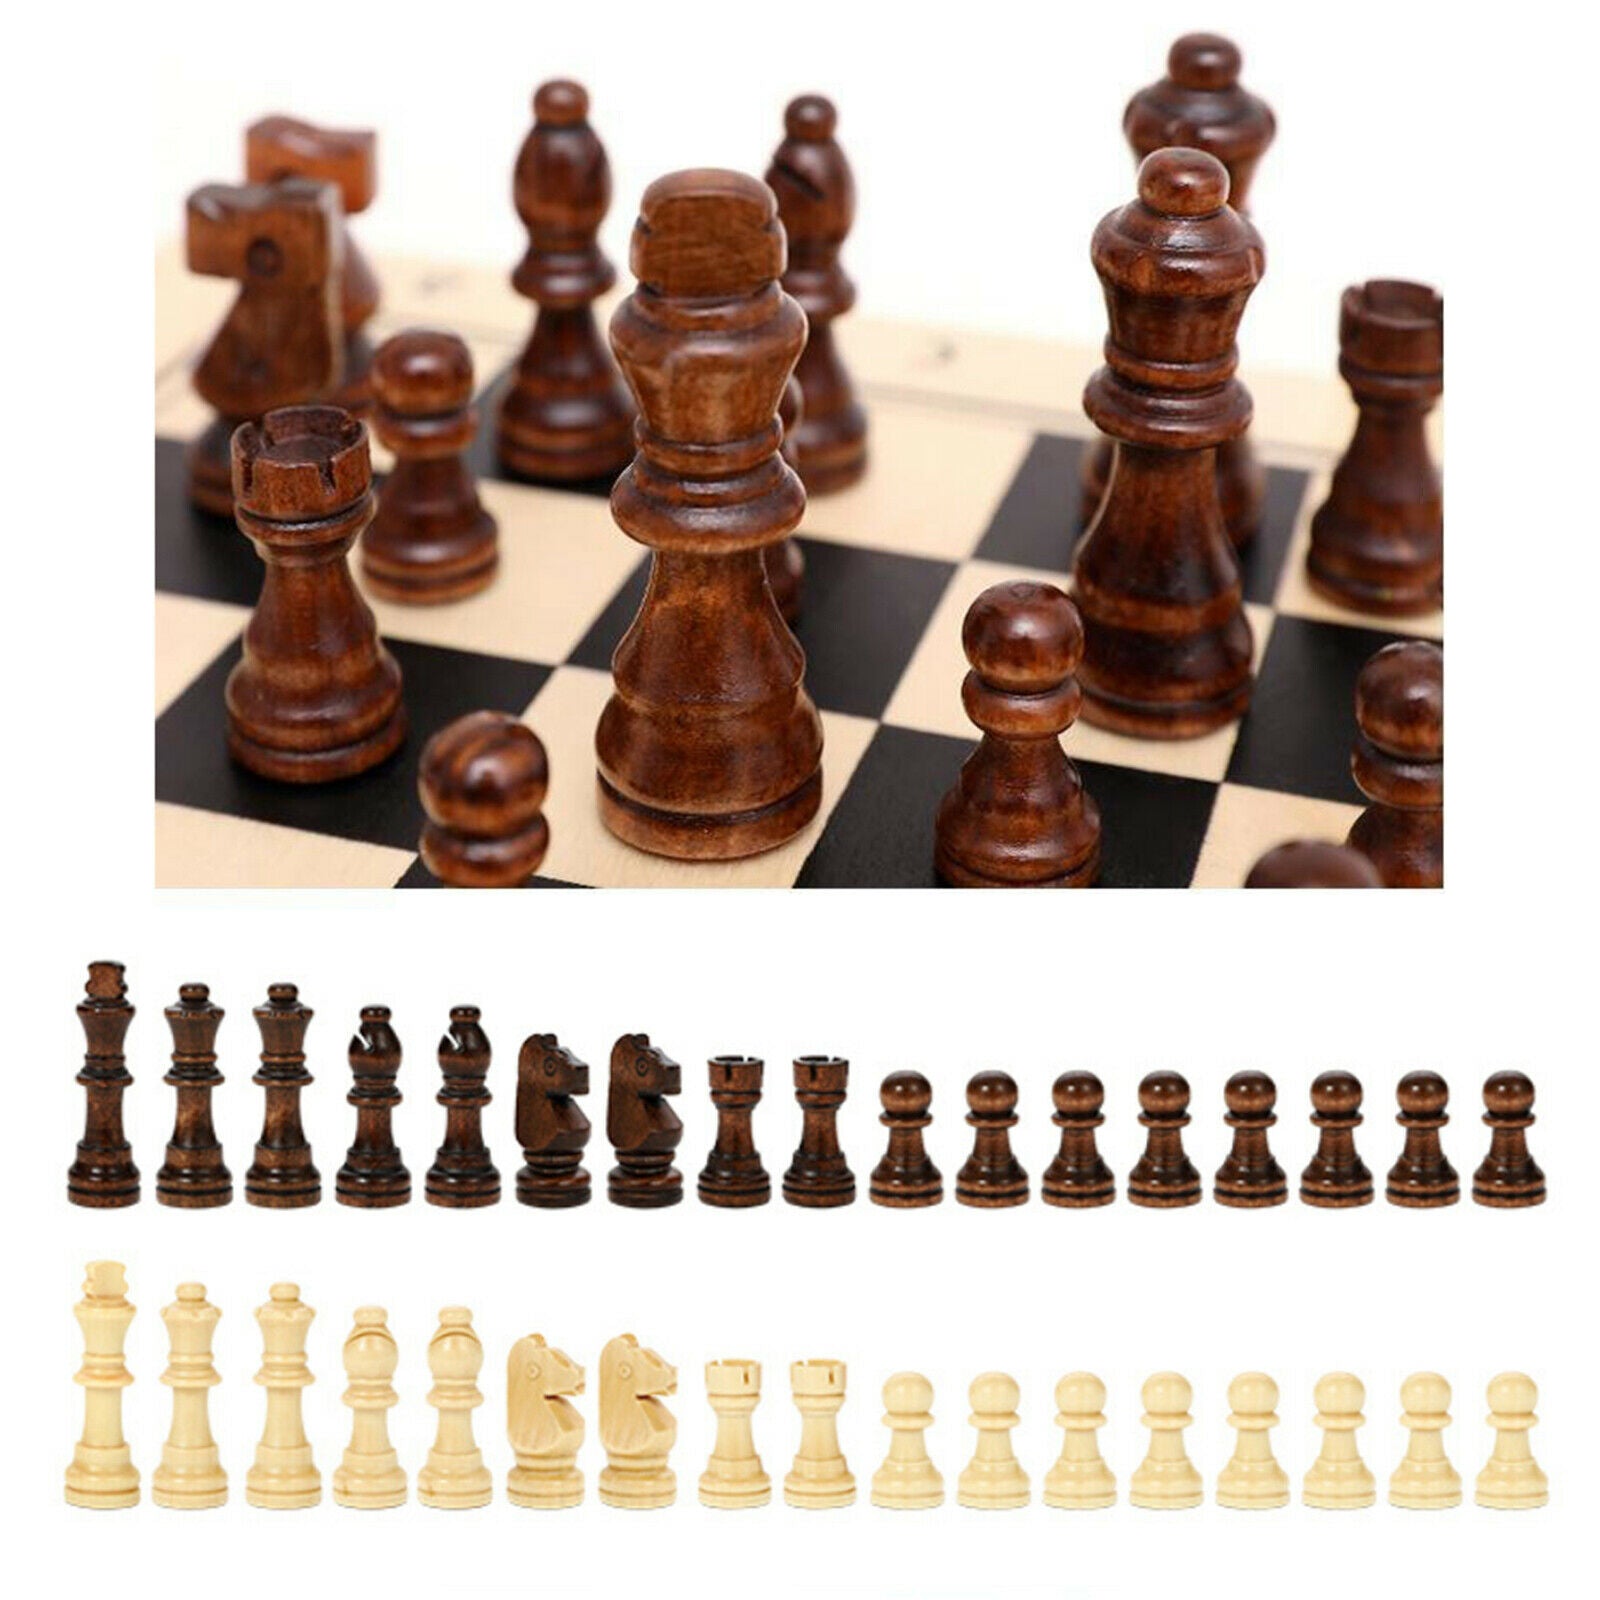 Folding Magnetic Wooden Chess Kit Foldable 15x15" Board for Adults Kids